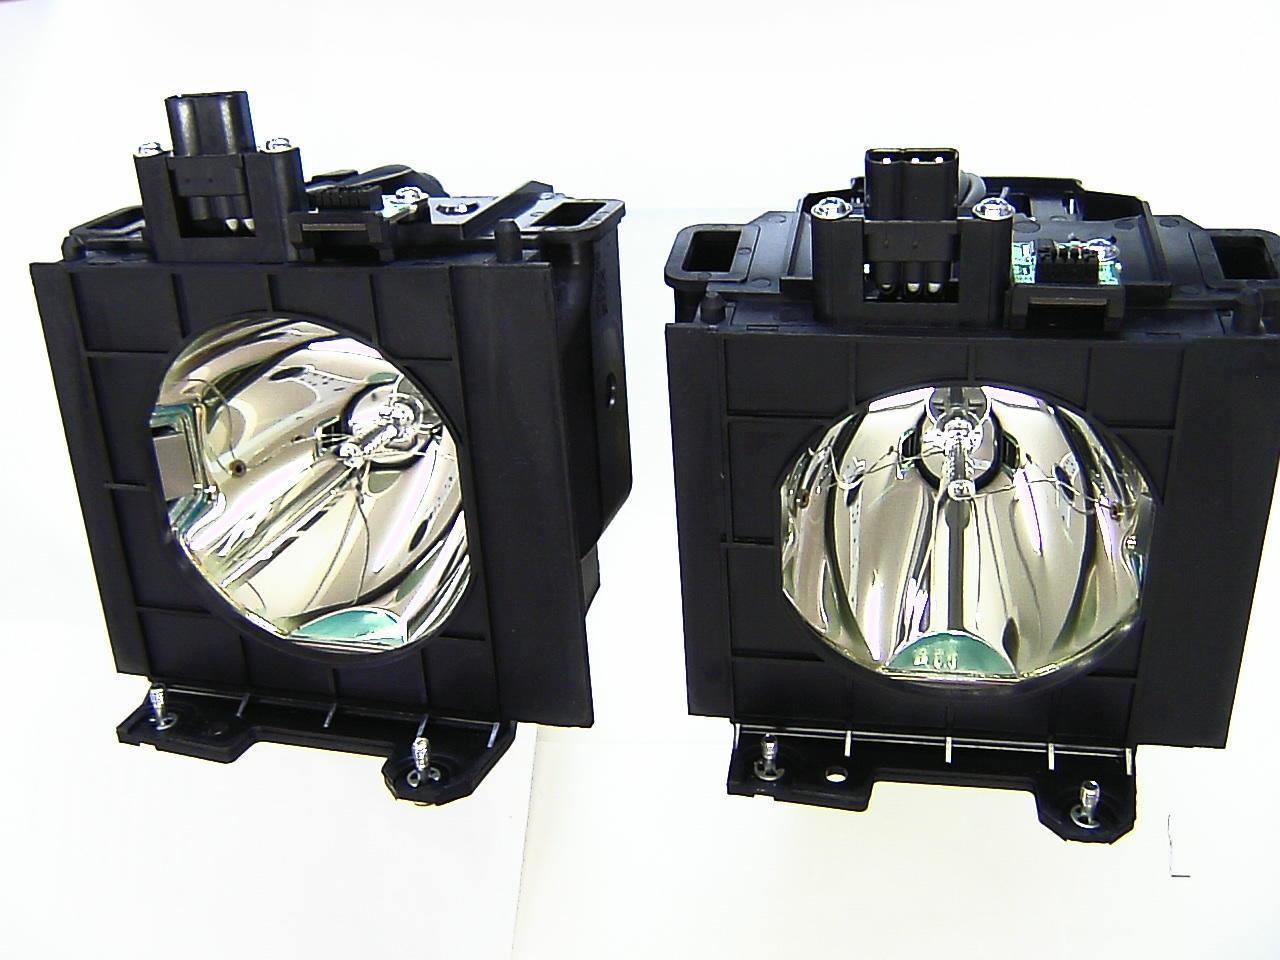 PT-D5700UL Panasonic Twin-Pack Projector Lamp Replacement (contains two lamps). Projector Lamp Assembly with High Quality OEM C